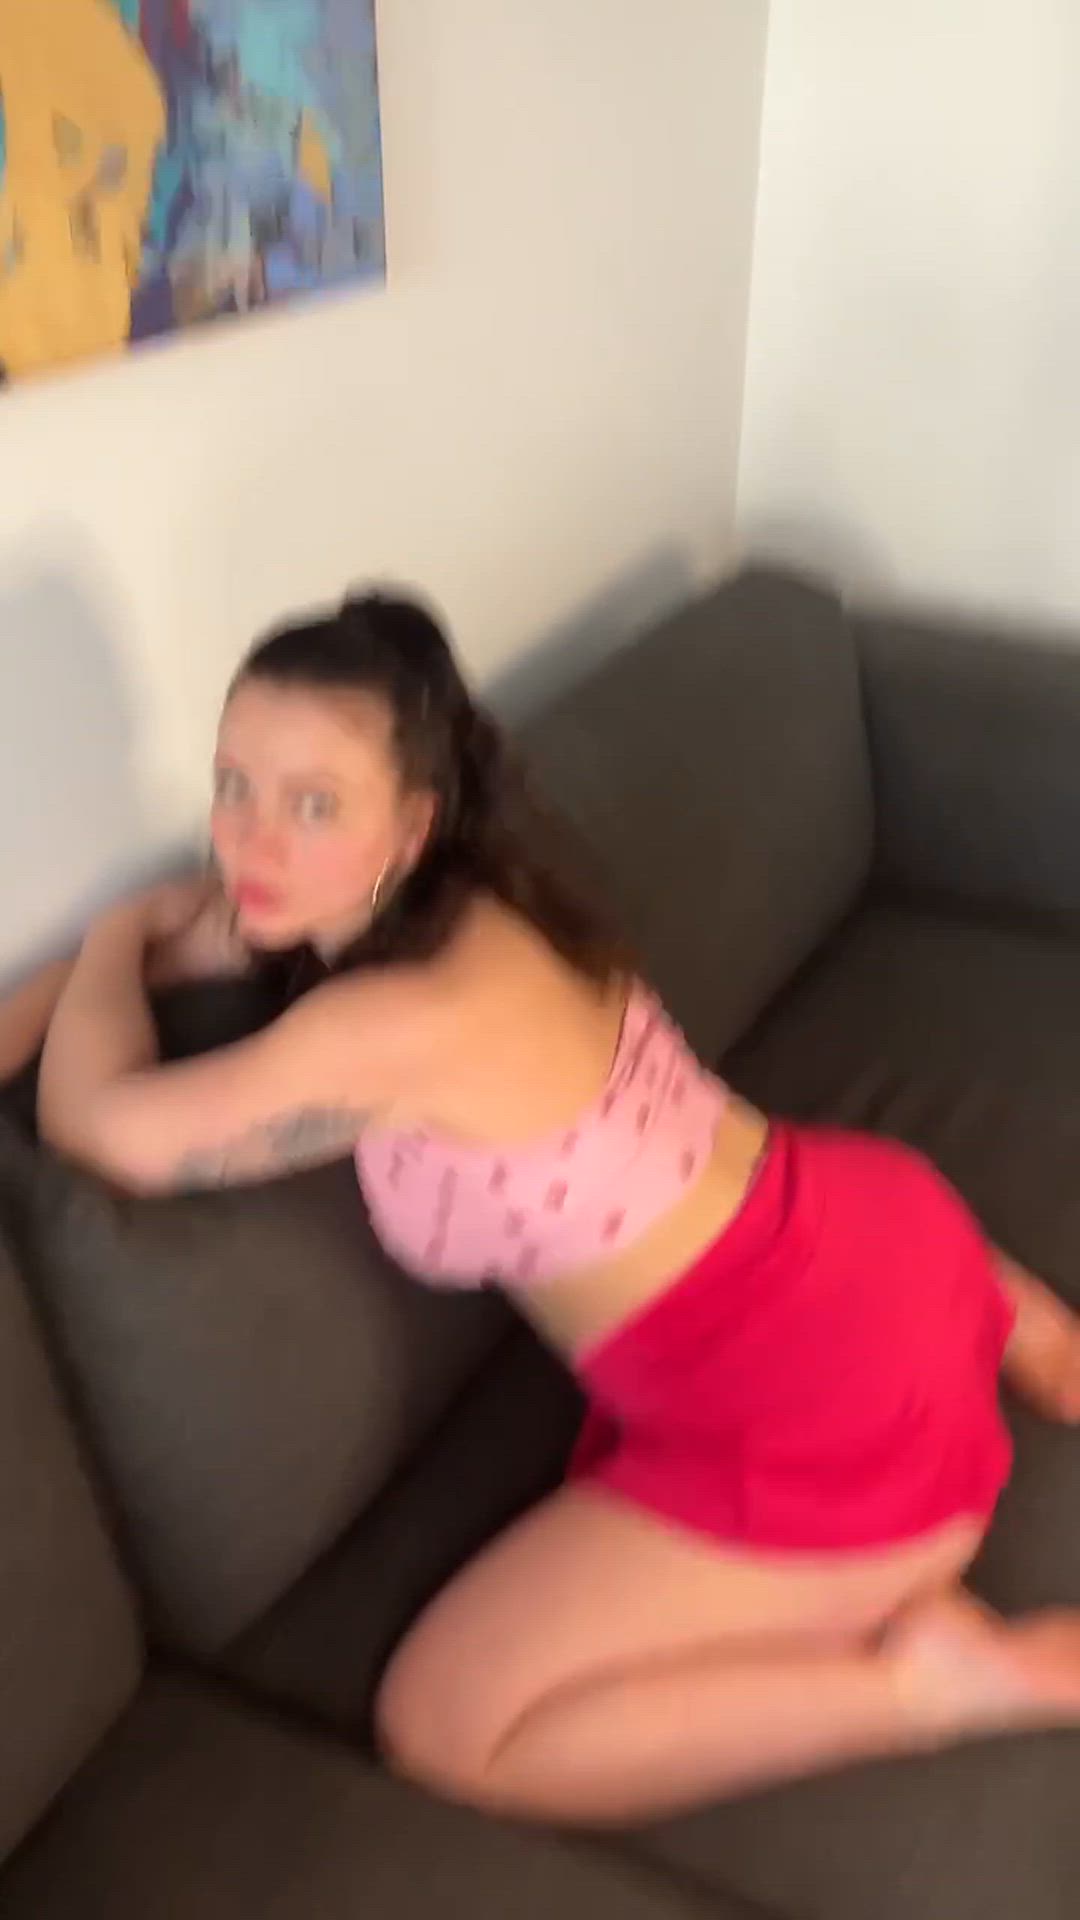 Ass porn video with onlyfans model jolinaelodie <strong>@jolinaelodie</strong>